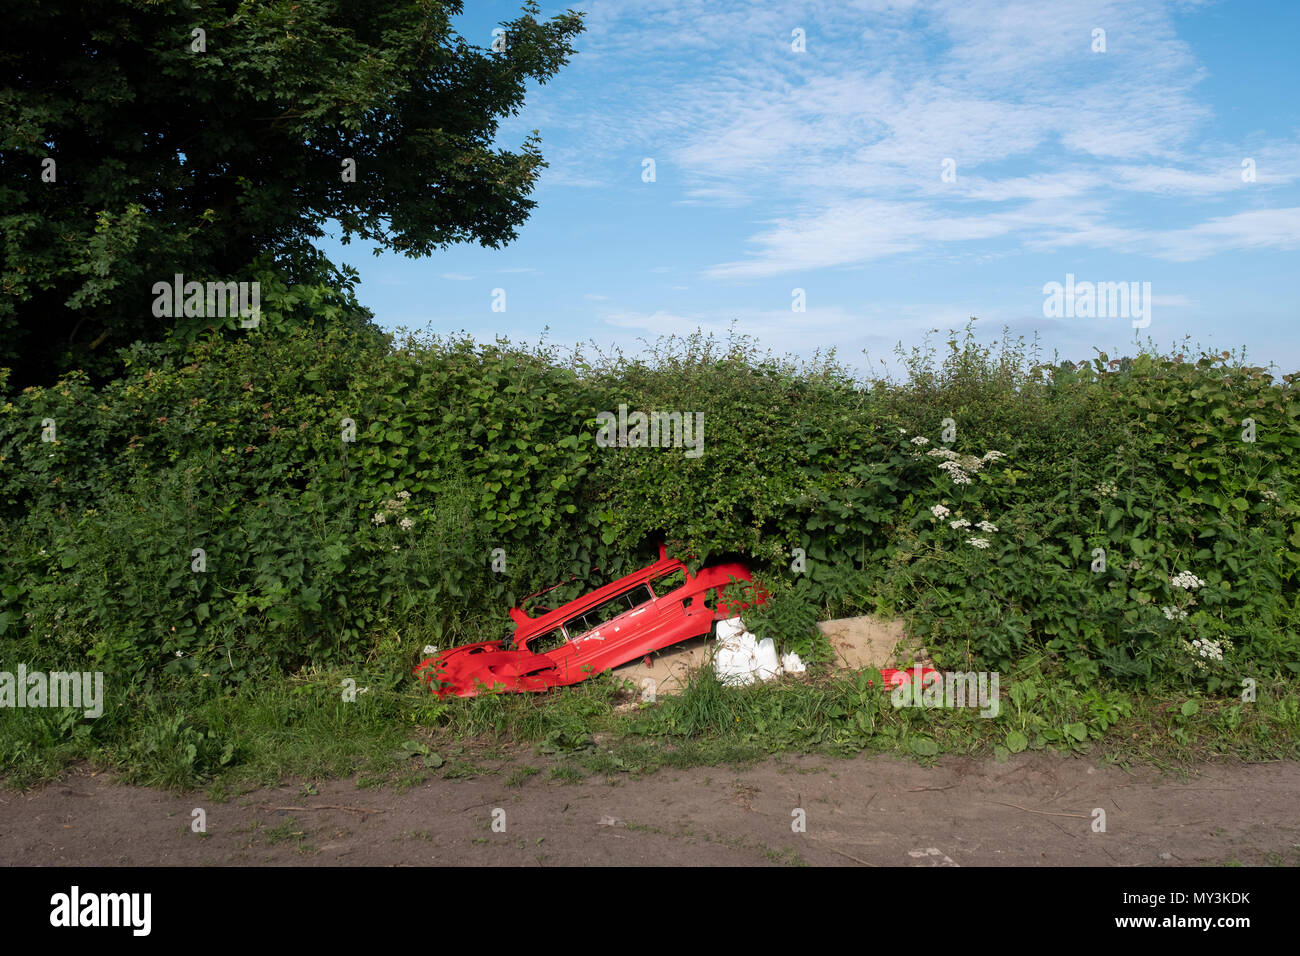 Part of the front end of a red car body is dumped in a hedgerow in the Worcestershire Countryside, UK. Stock Photo